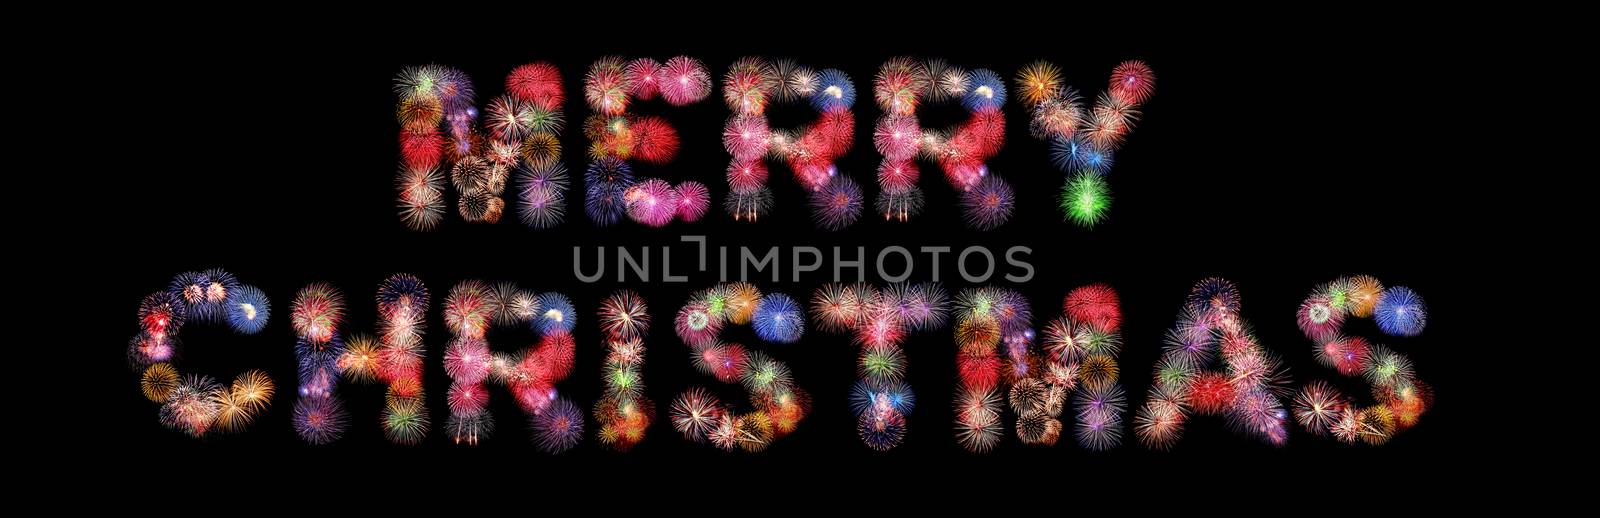 merry christmas colorful fireworks isolated on black background